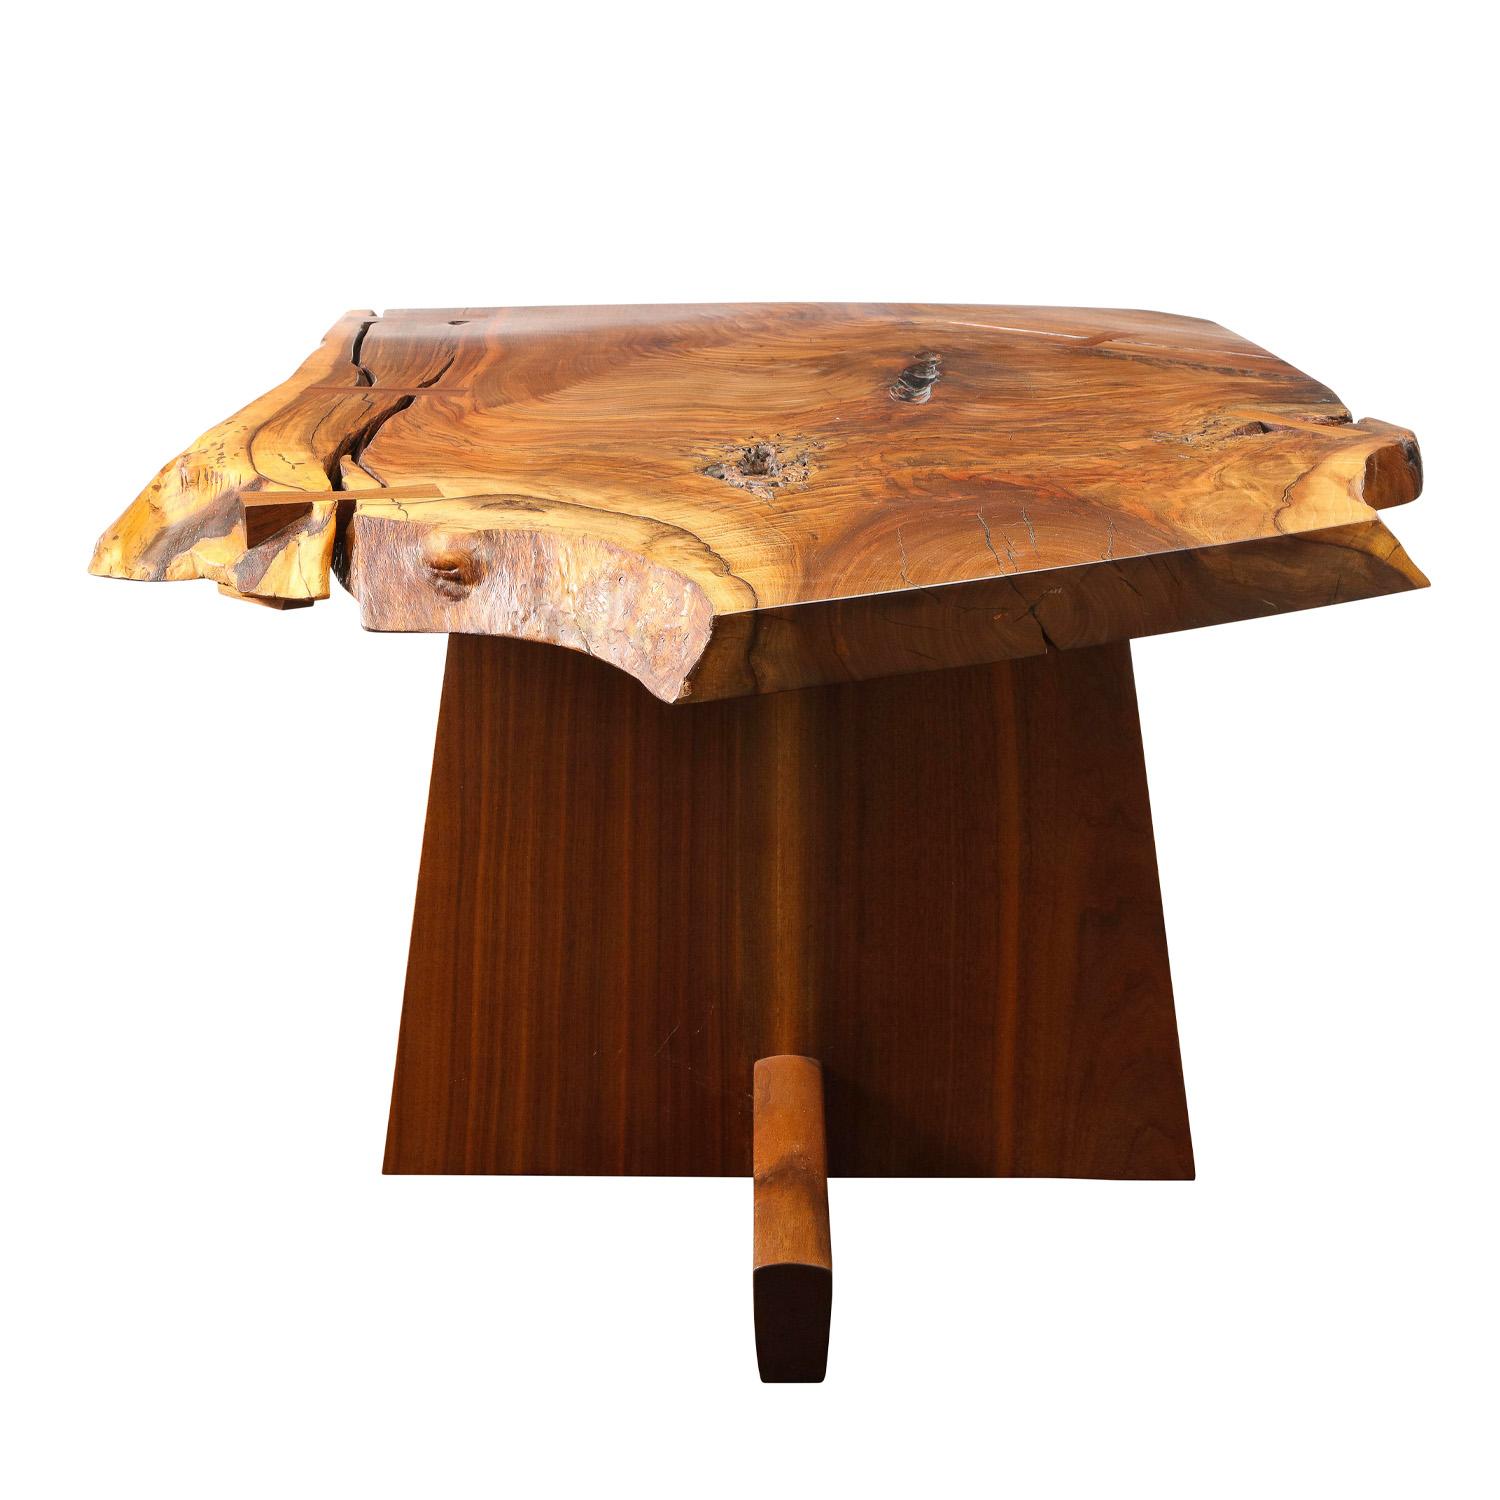 American Mira Nakashima Stunning Free Edge Table in Black Walnut 2007 'Signed and Dated'